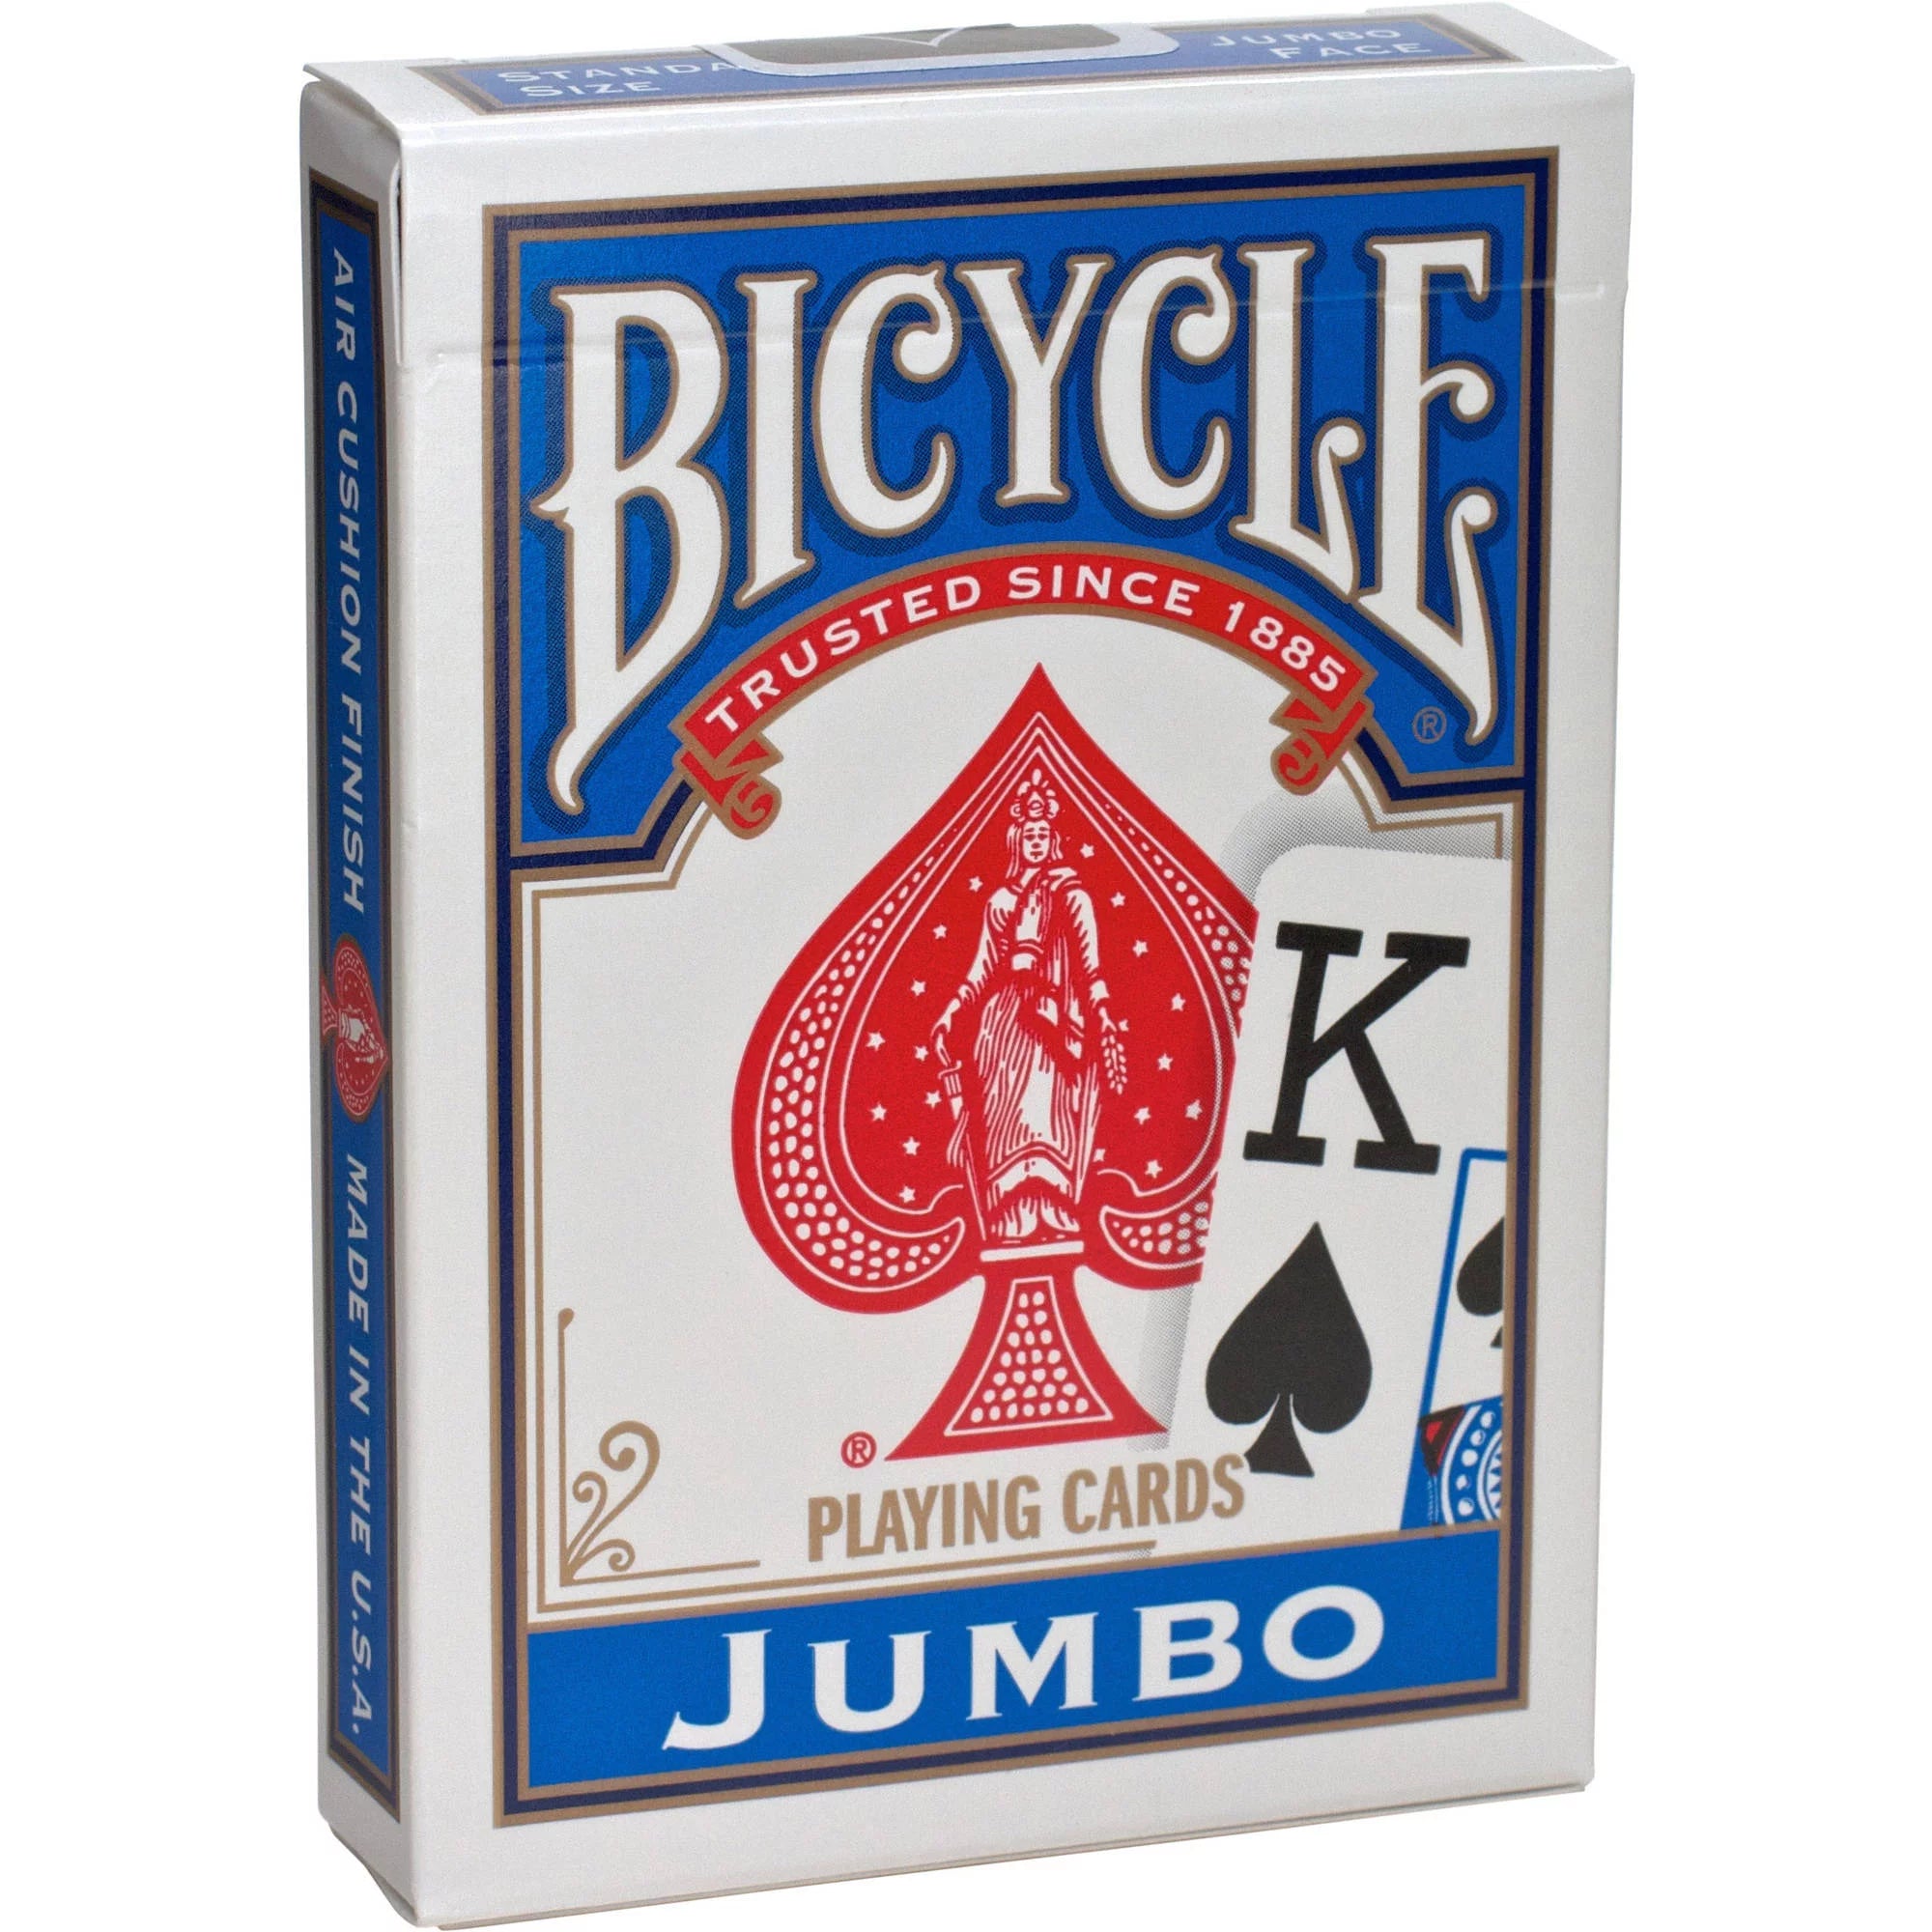 Board Game - Bicycle Playing Cards - Jumbo Index | Event Horizon Hobbies CA